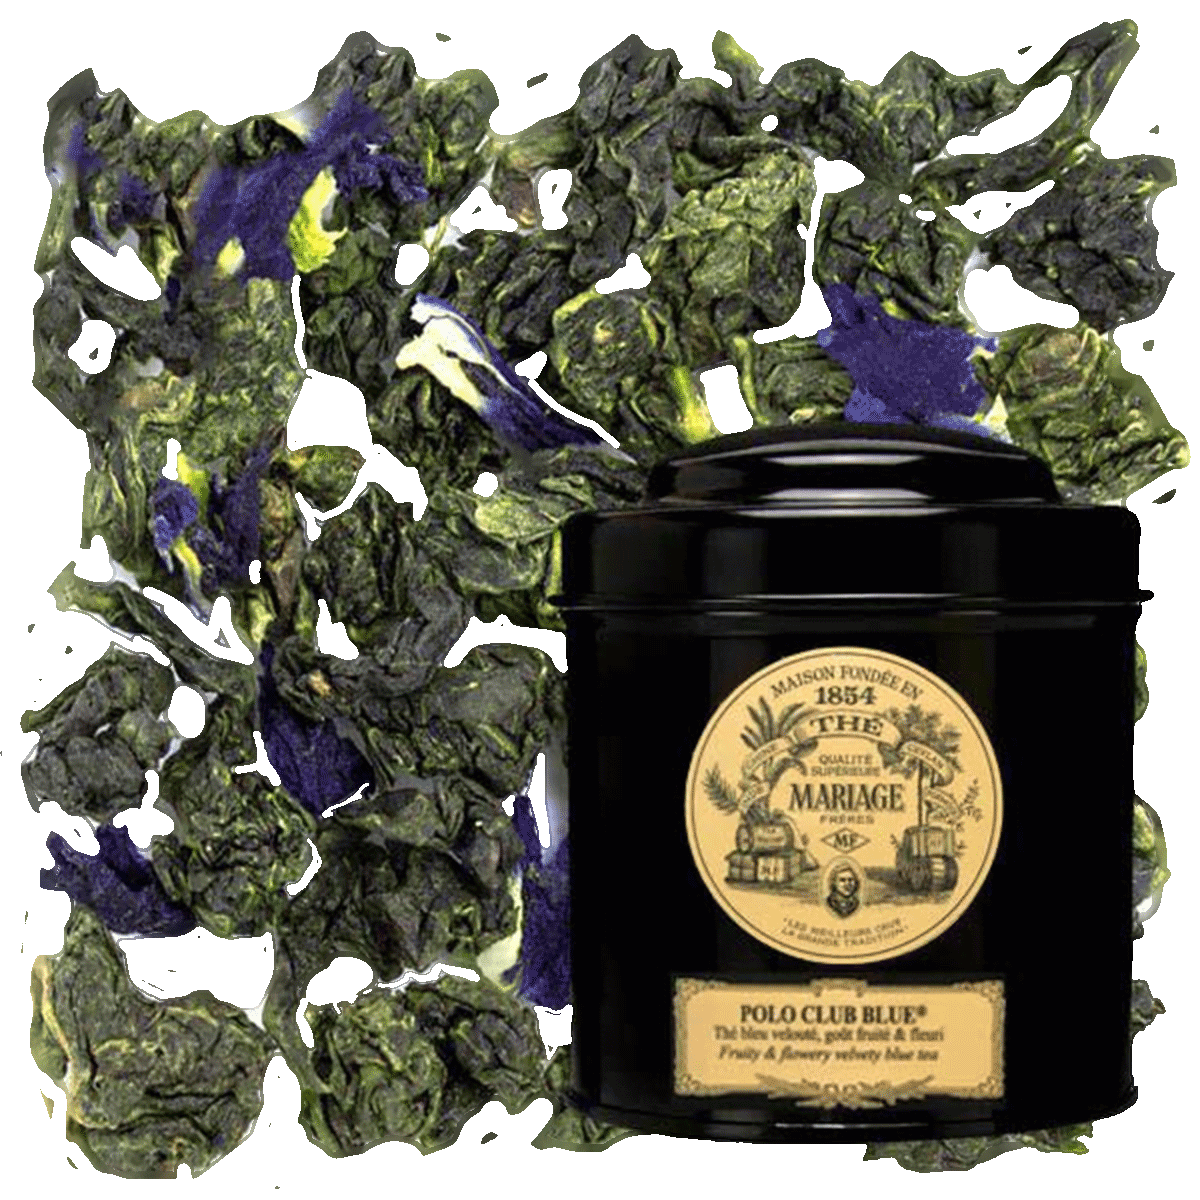 Midnight in Jerusalem - Sublime Blue Tea Tea by Mariage Frères — Steepster